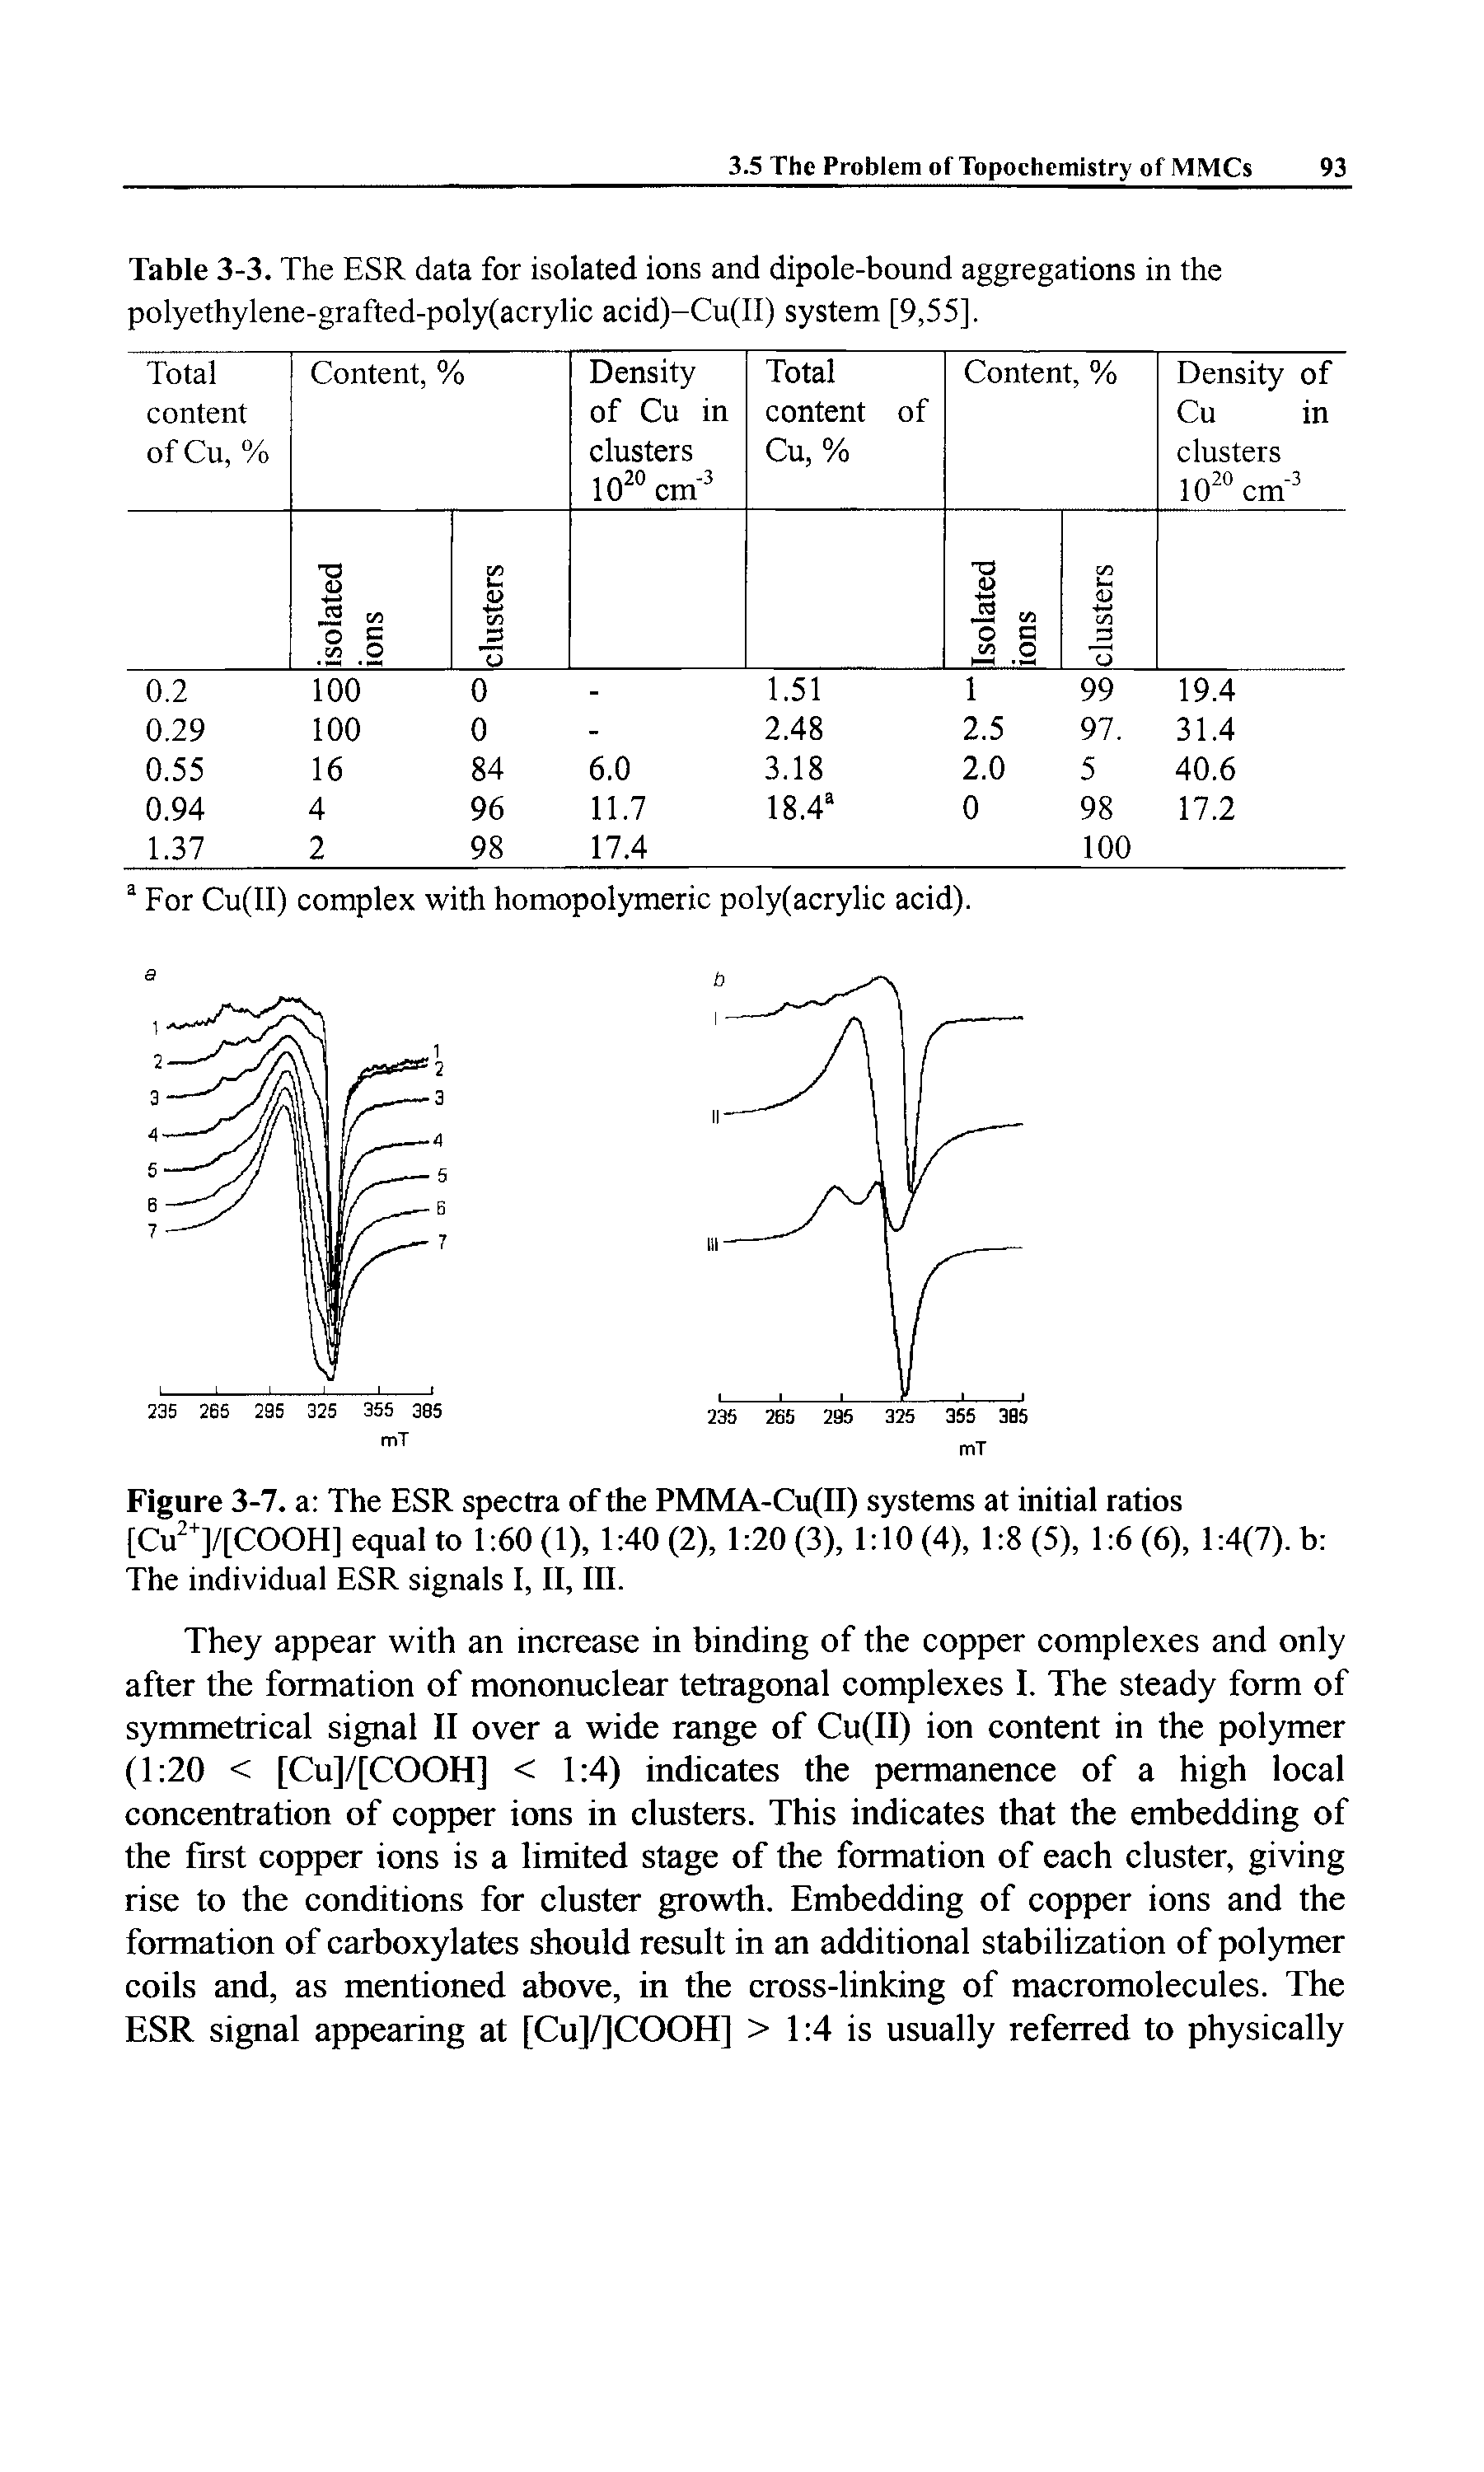 Table 3-3. The ESR data for isolated ions and dipole-bound aggregations in the polyethylene-grafted-poly(acrylic acid)-Cu(II) system [9,55].